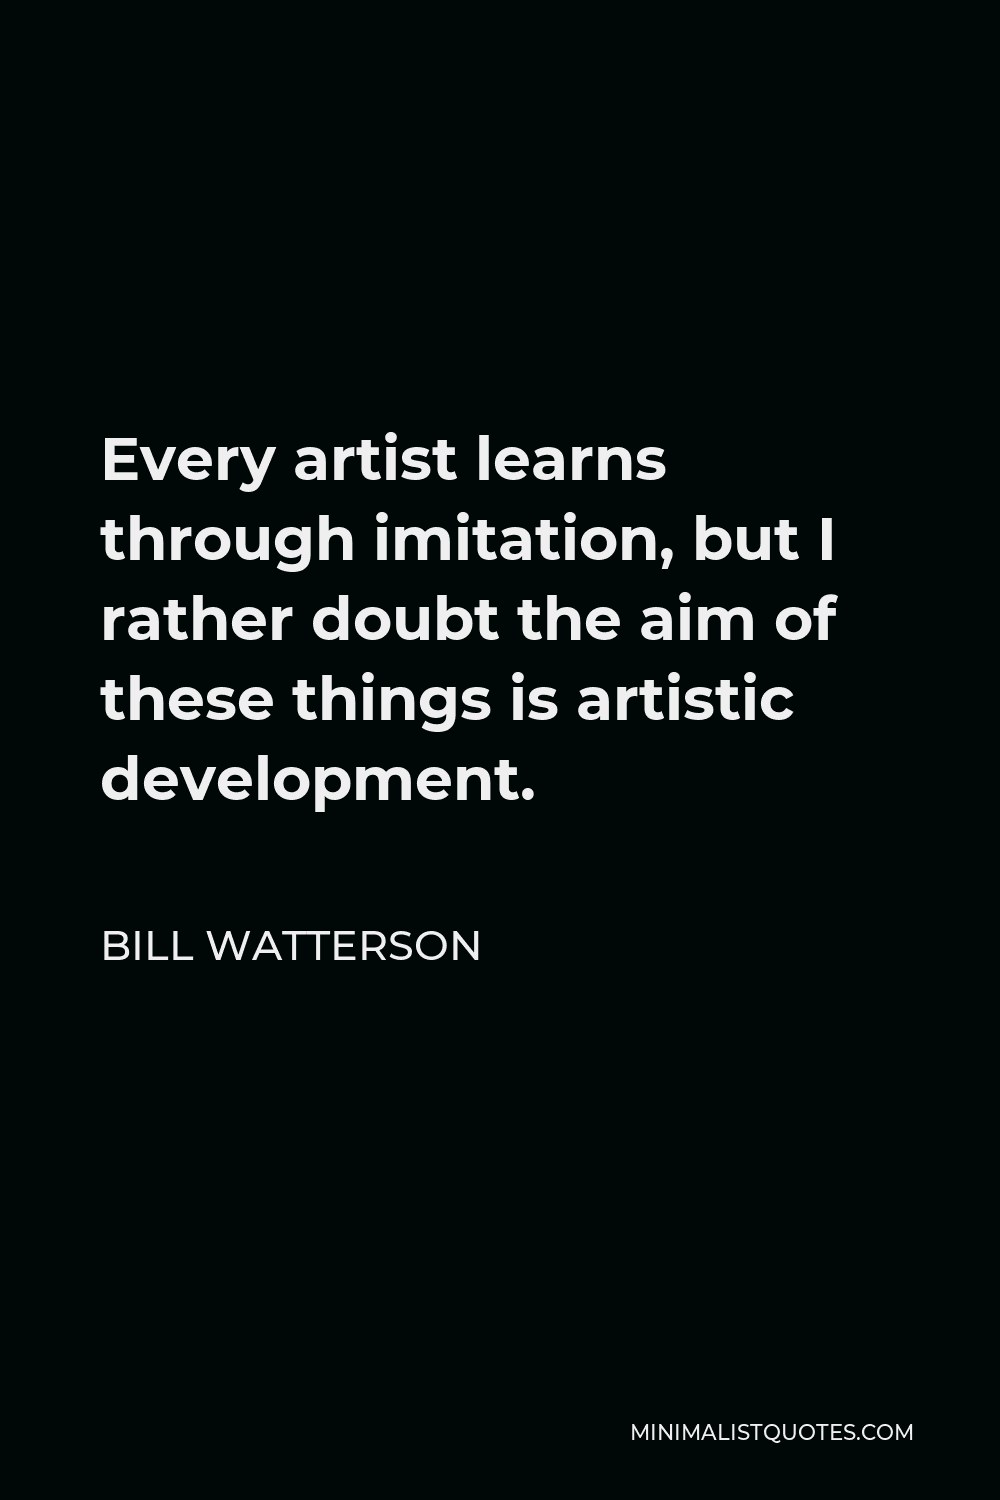 Bill Watterson Quote - Every artist learns through imitation, but I rather doubt the aim of these things is artistic development.